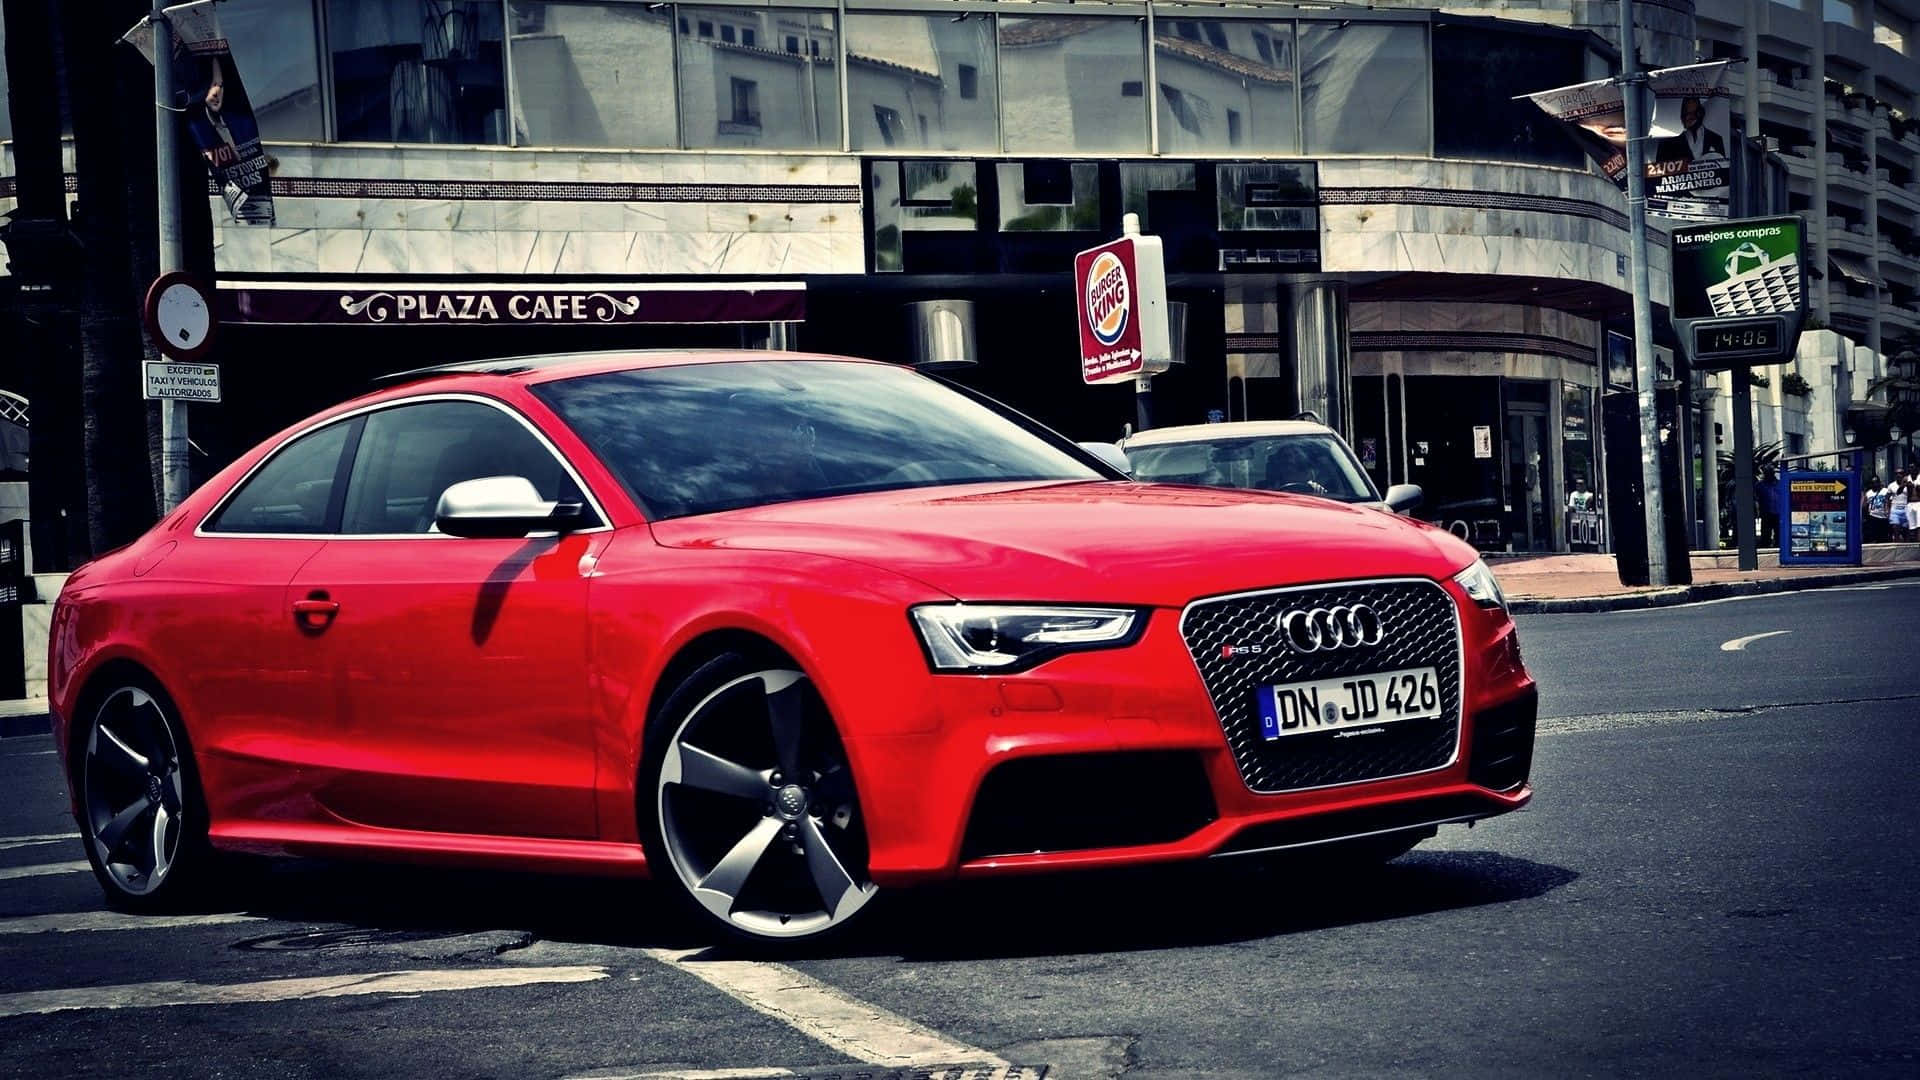 A Powerful and Elegant Audi S5 Wallpaper